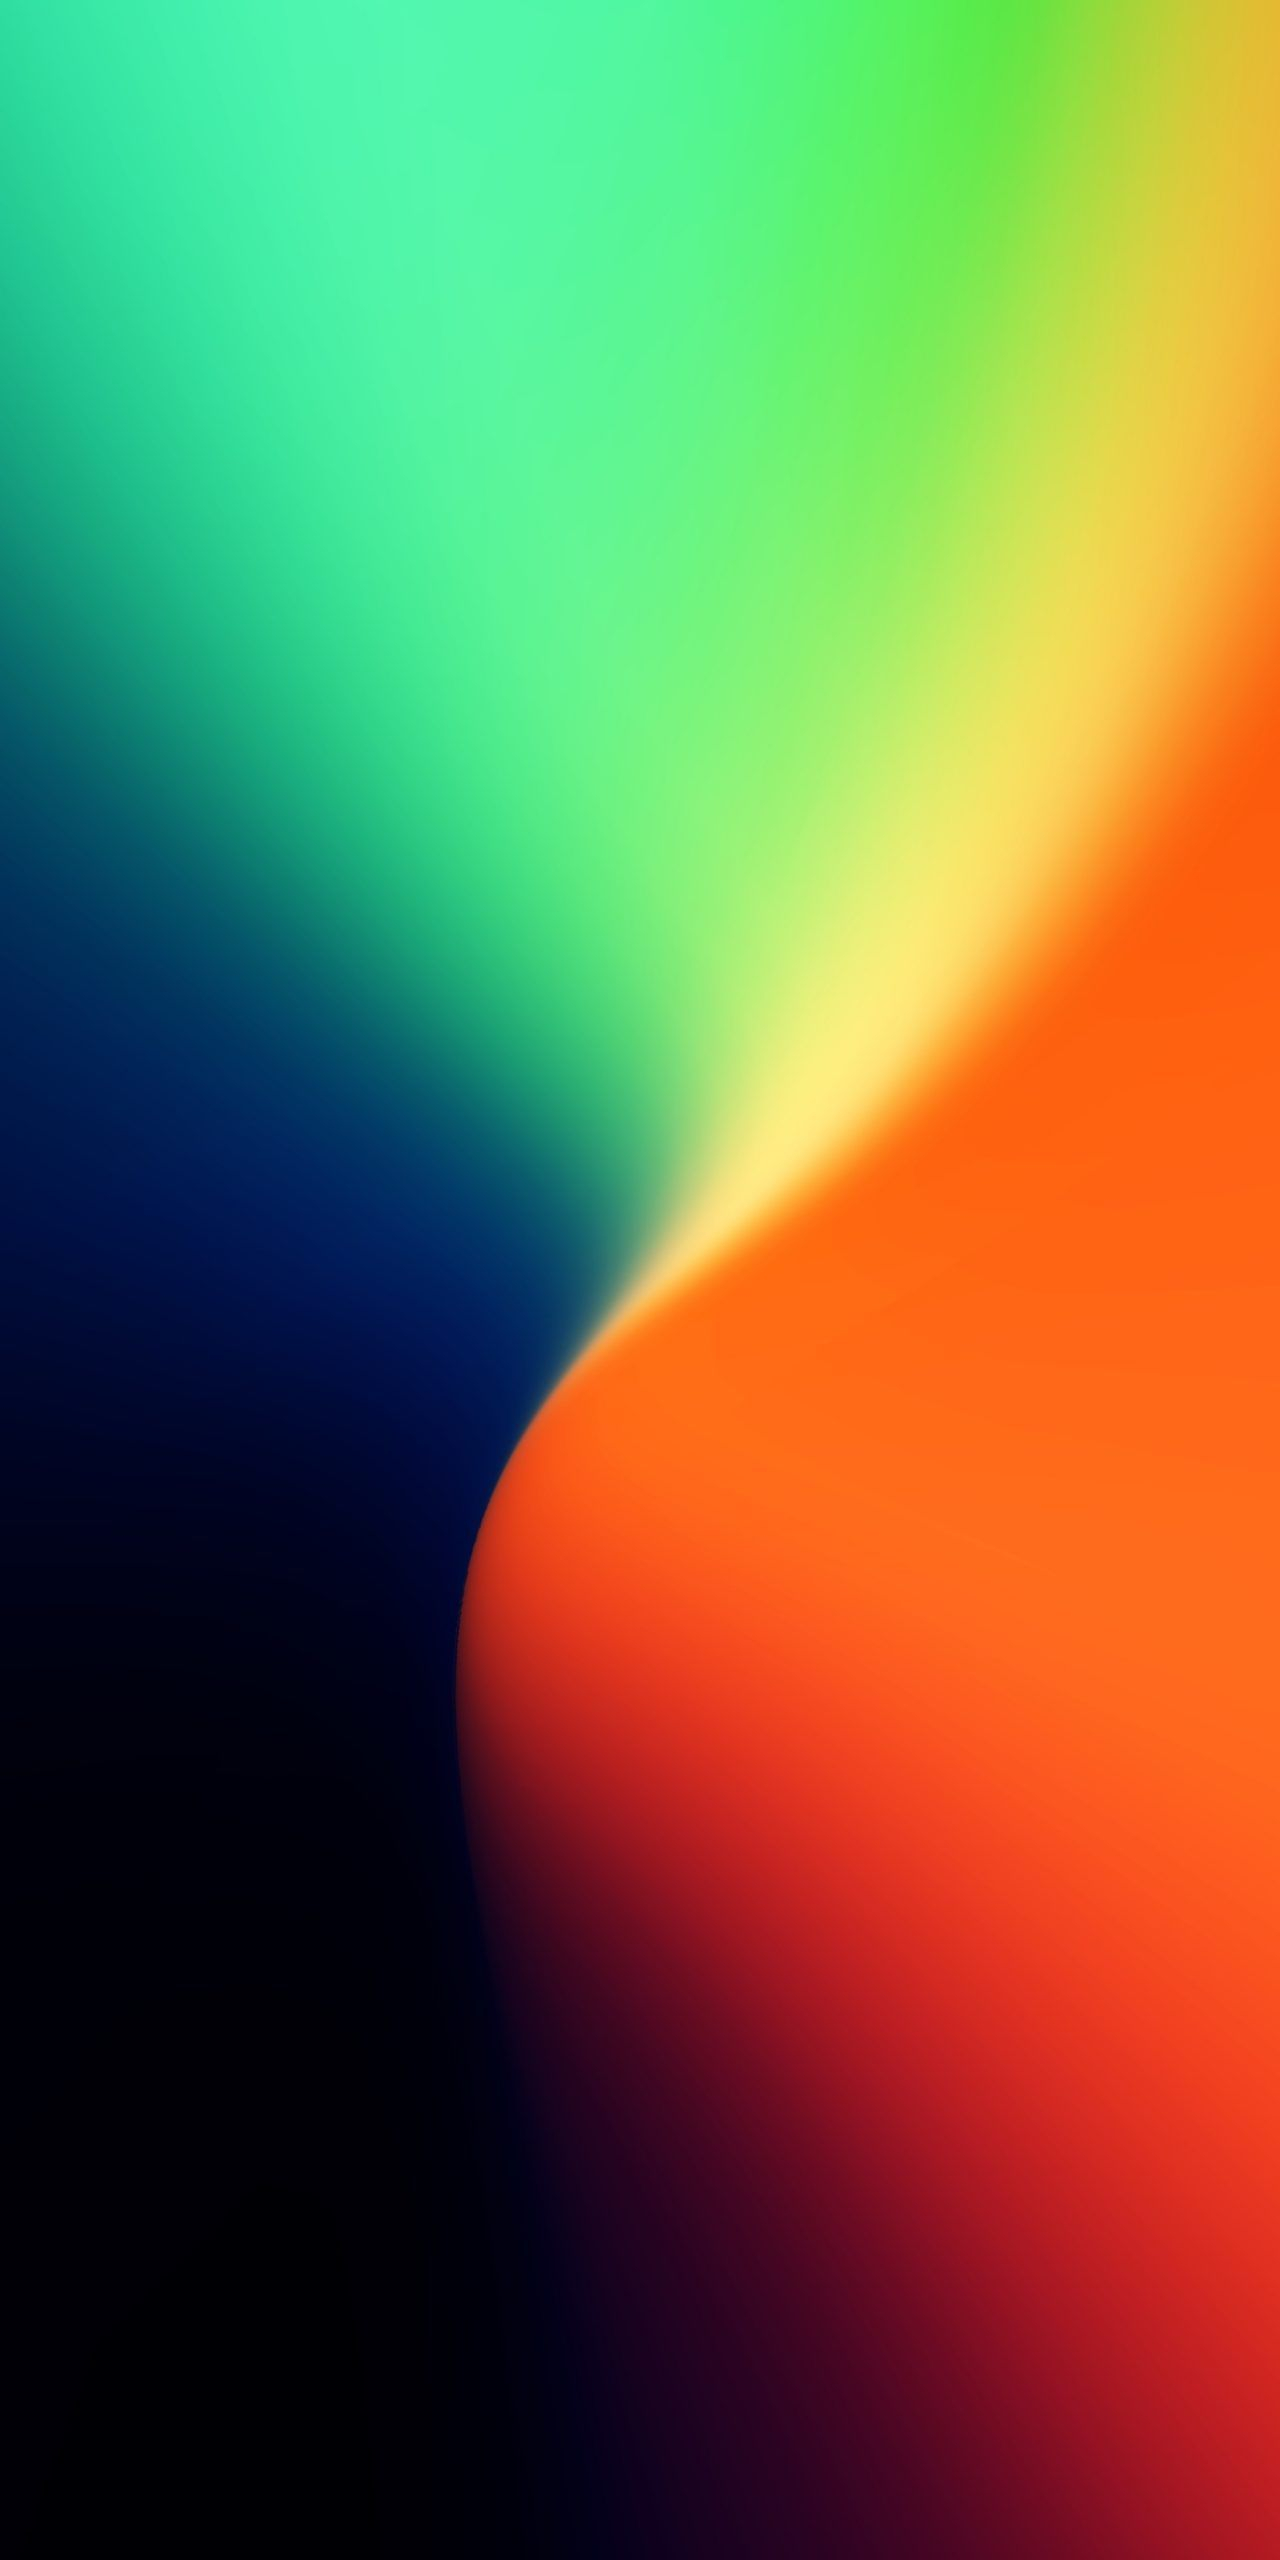 1280x2560 Gradient blue, orange, green and yellow by @Ongliong11 | Color wallpaper iphone, Samsung galaxy wallpaper, Samsung wallpaper android